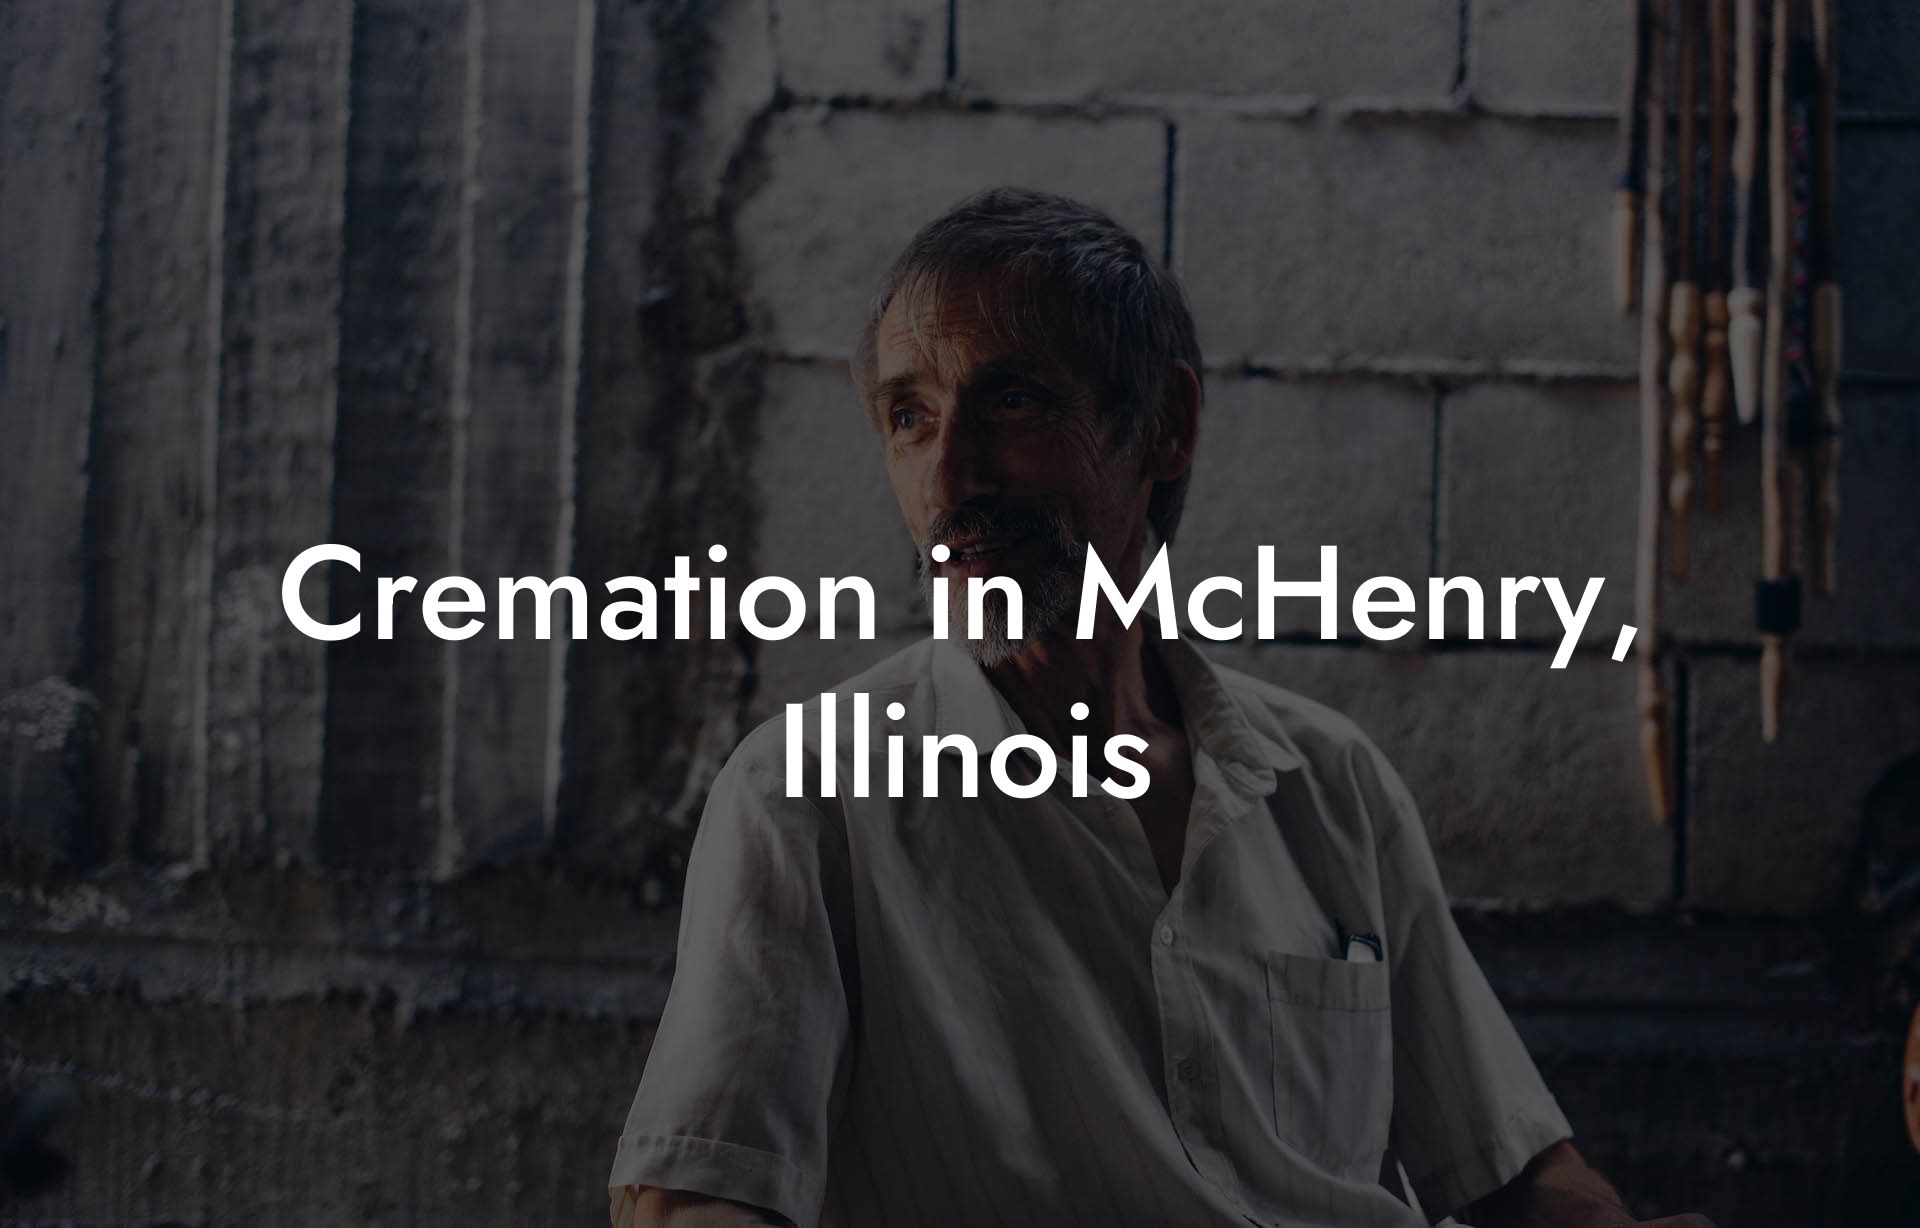 Cremation in McHenry, Illinois